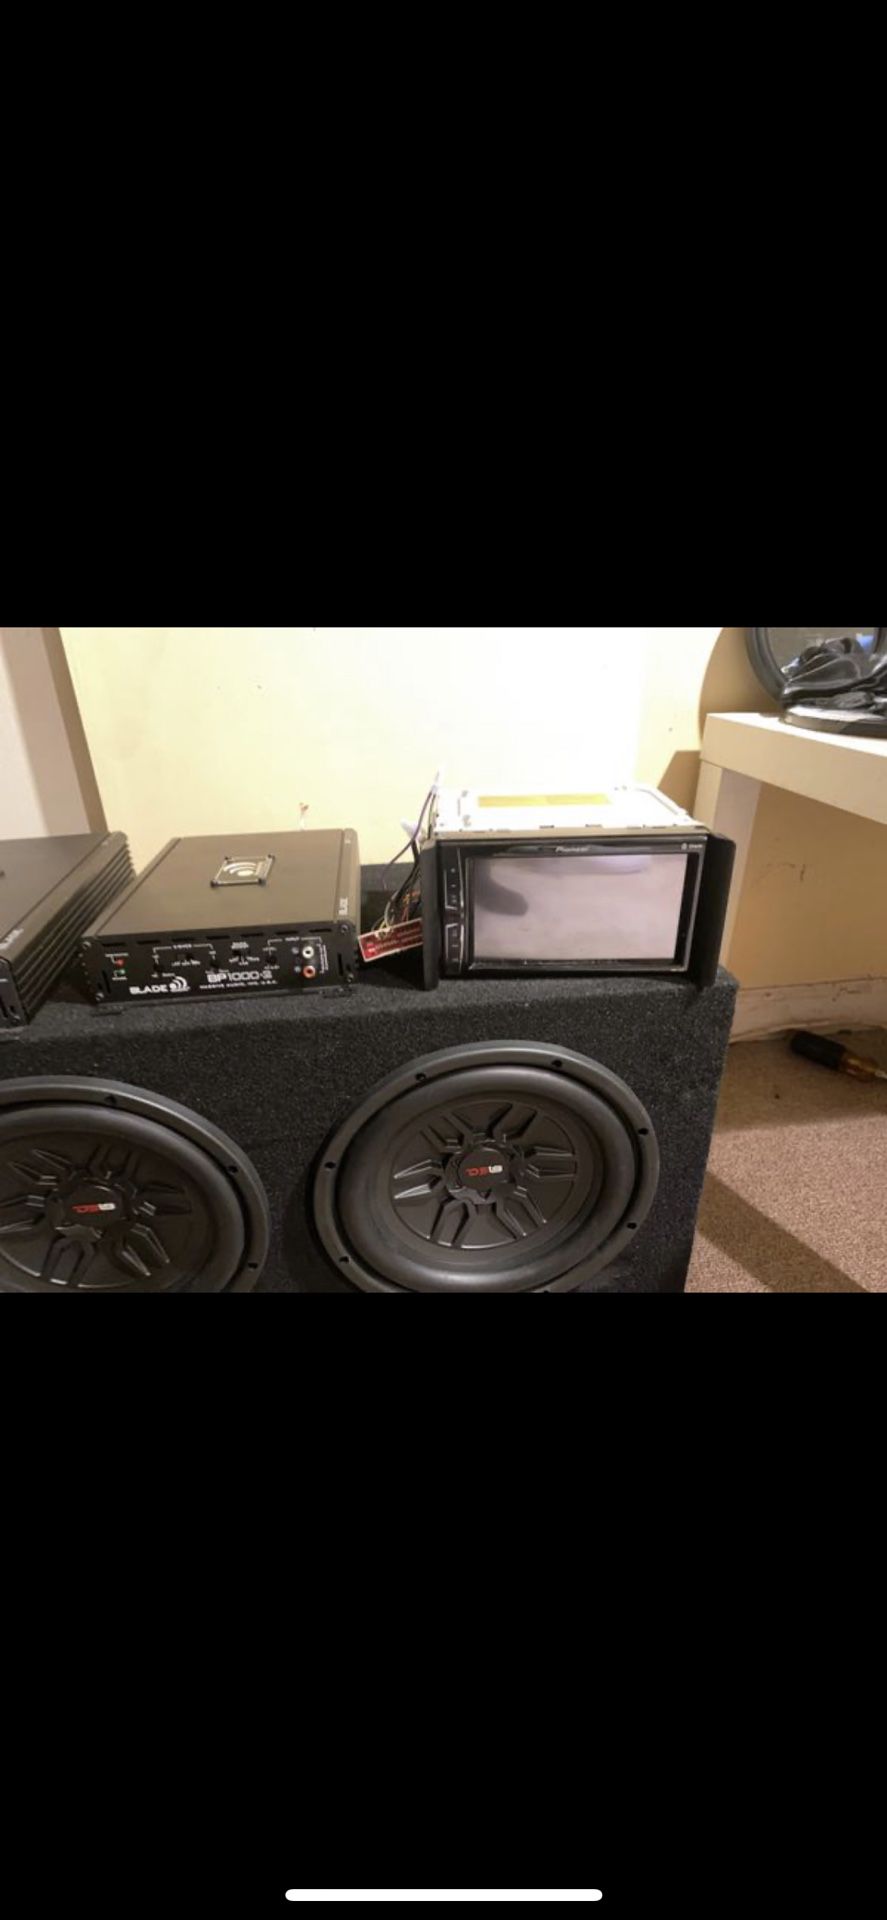 Car Stereo system